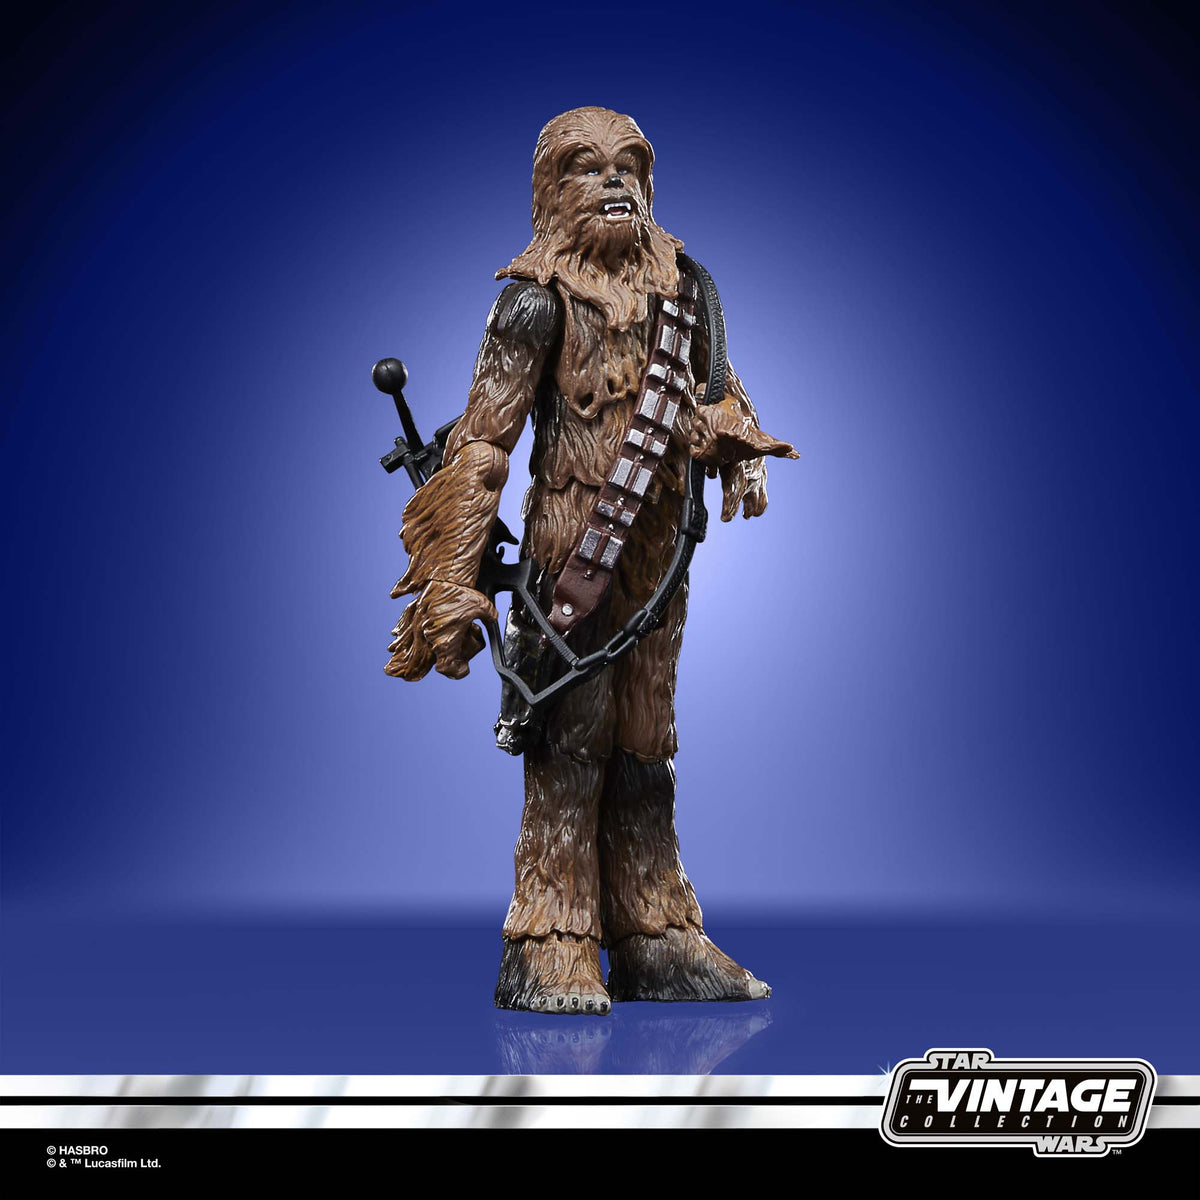 Star Wars The Vintage Collection at-ST & Chewbacca, Star Wars